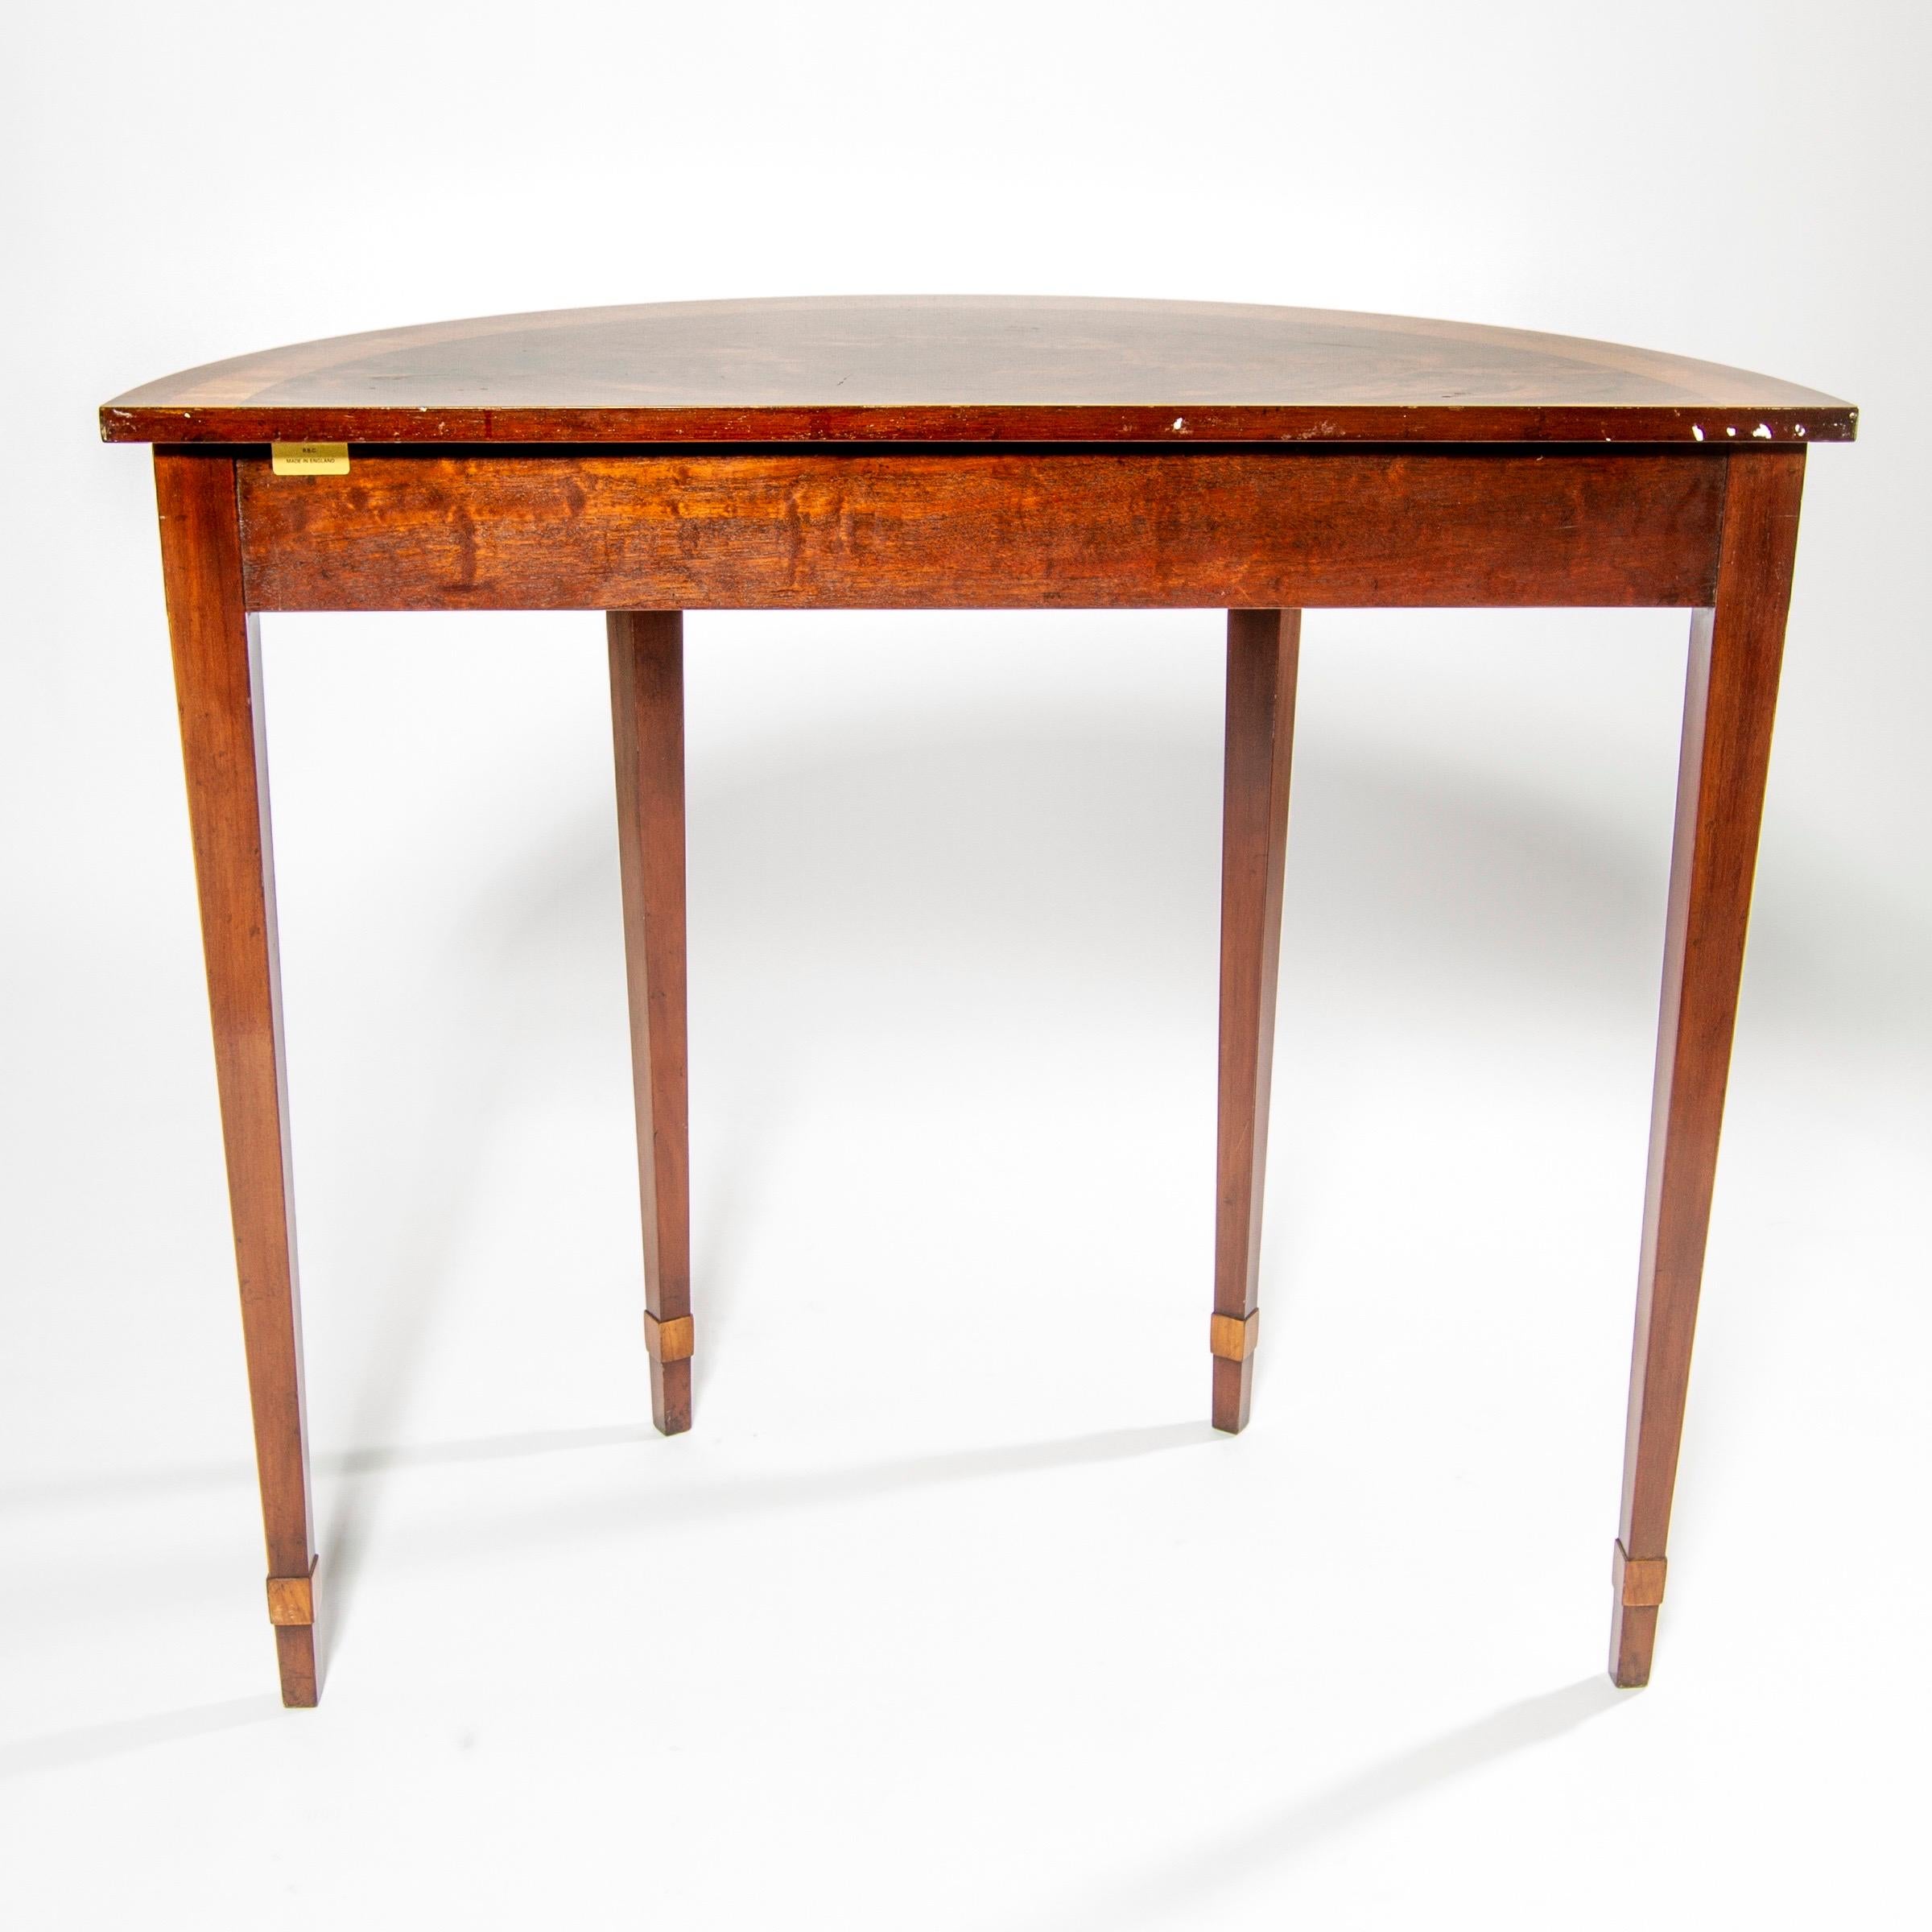 Elm 20th Century Neoclassical Directoire Mahogany Inlay Demilune Console Table, RBC For Sale